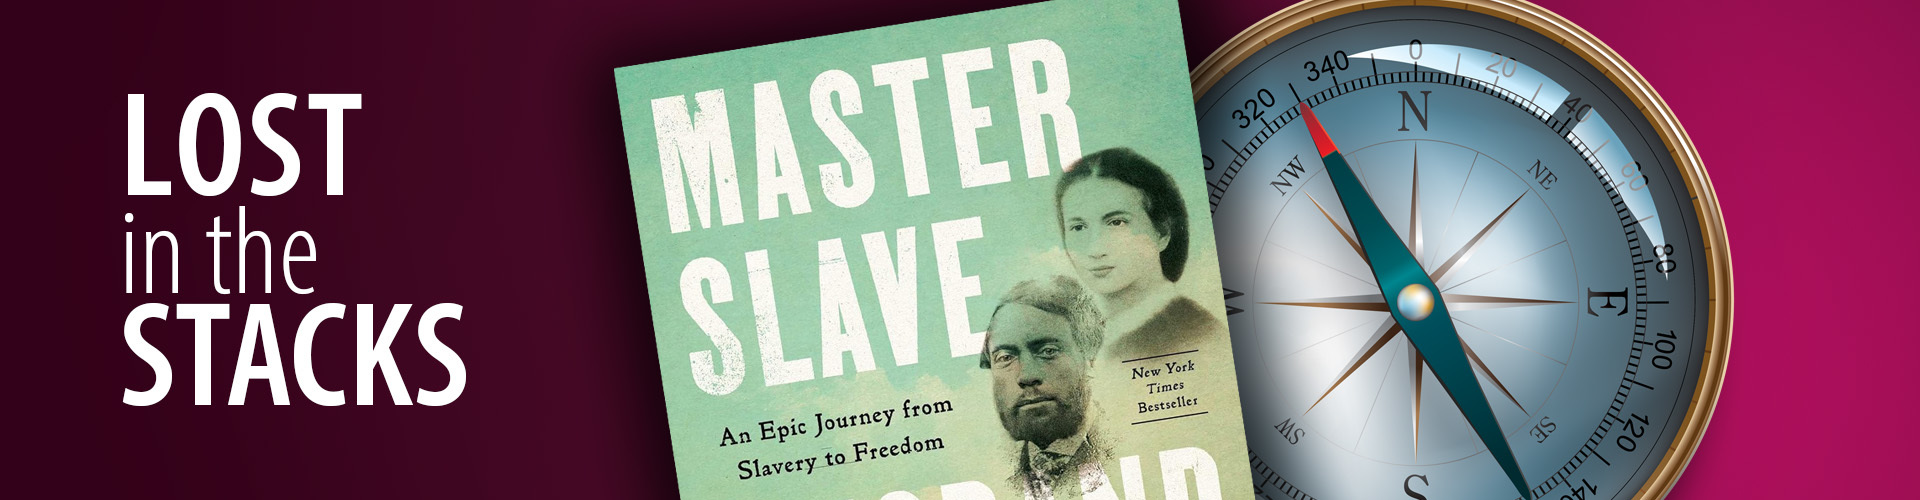 master slave featured 1920x500